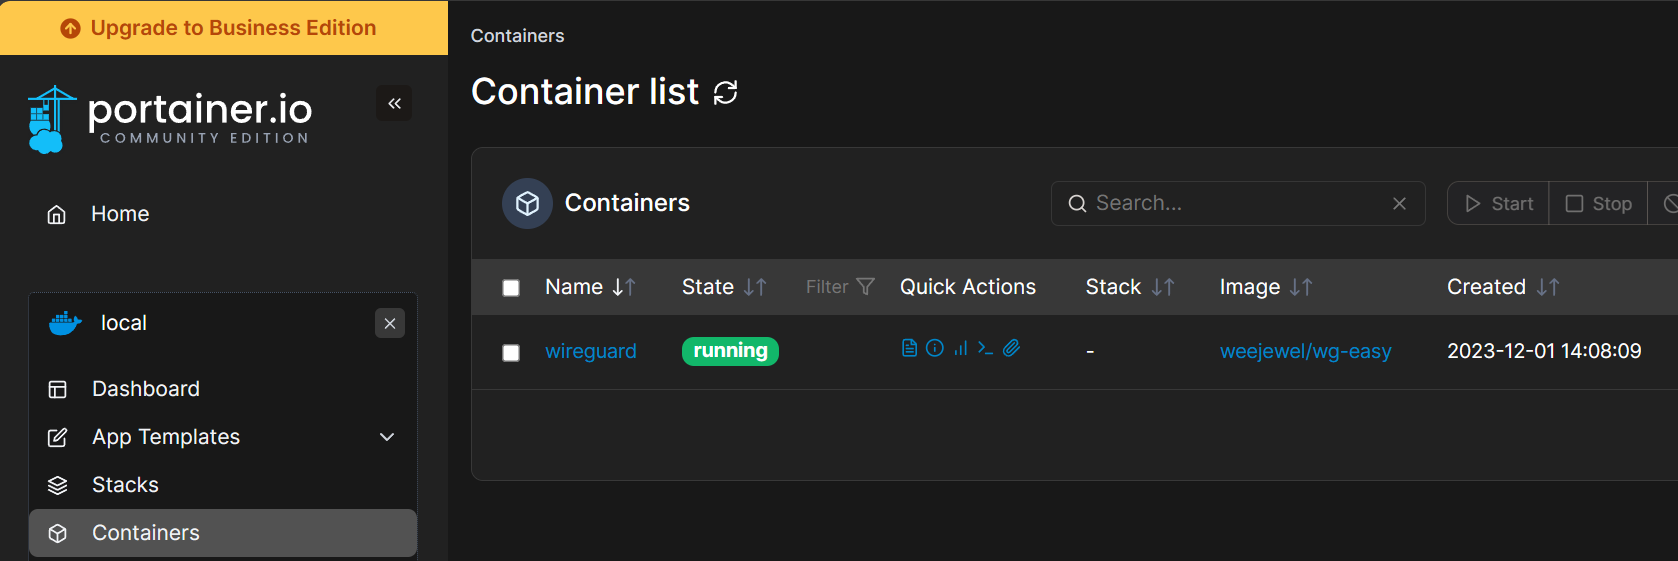 viewing a container in portainer.